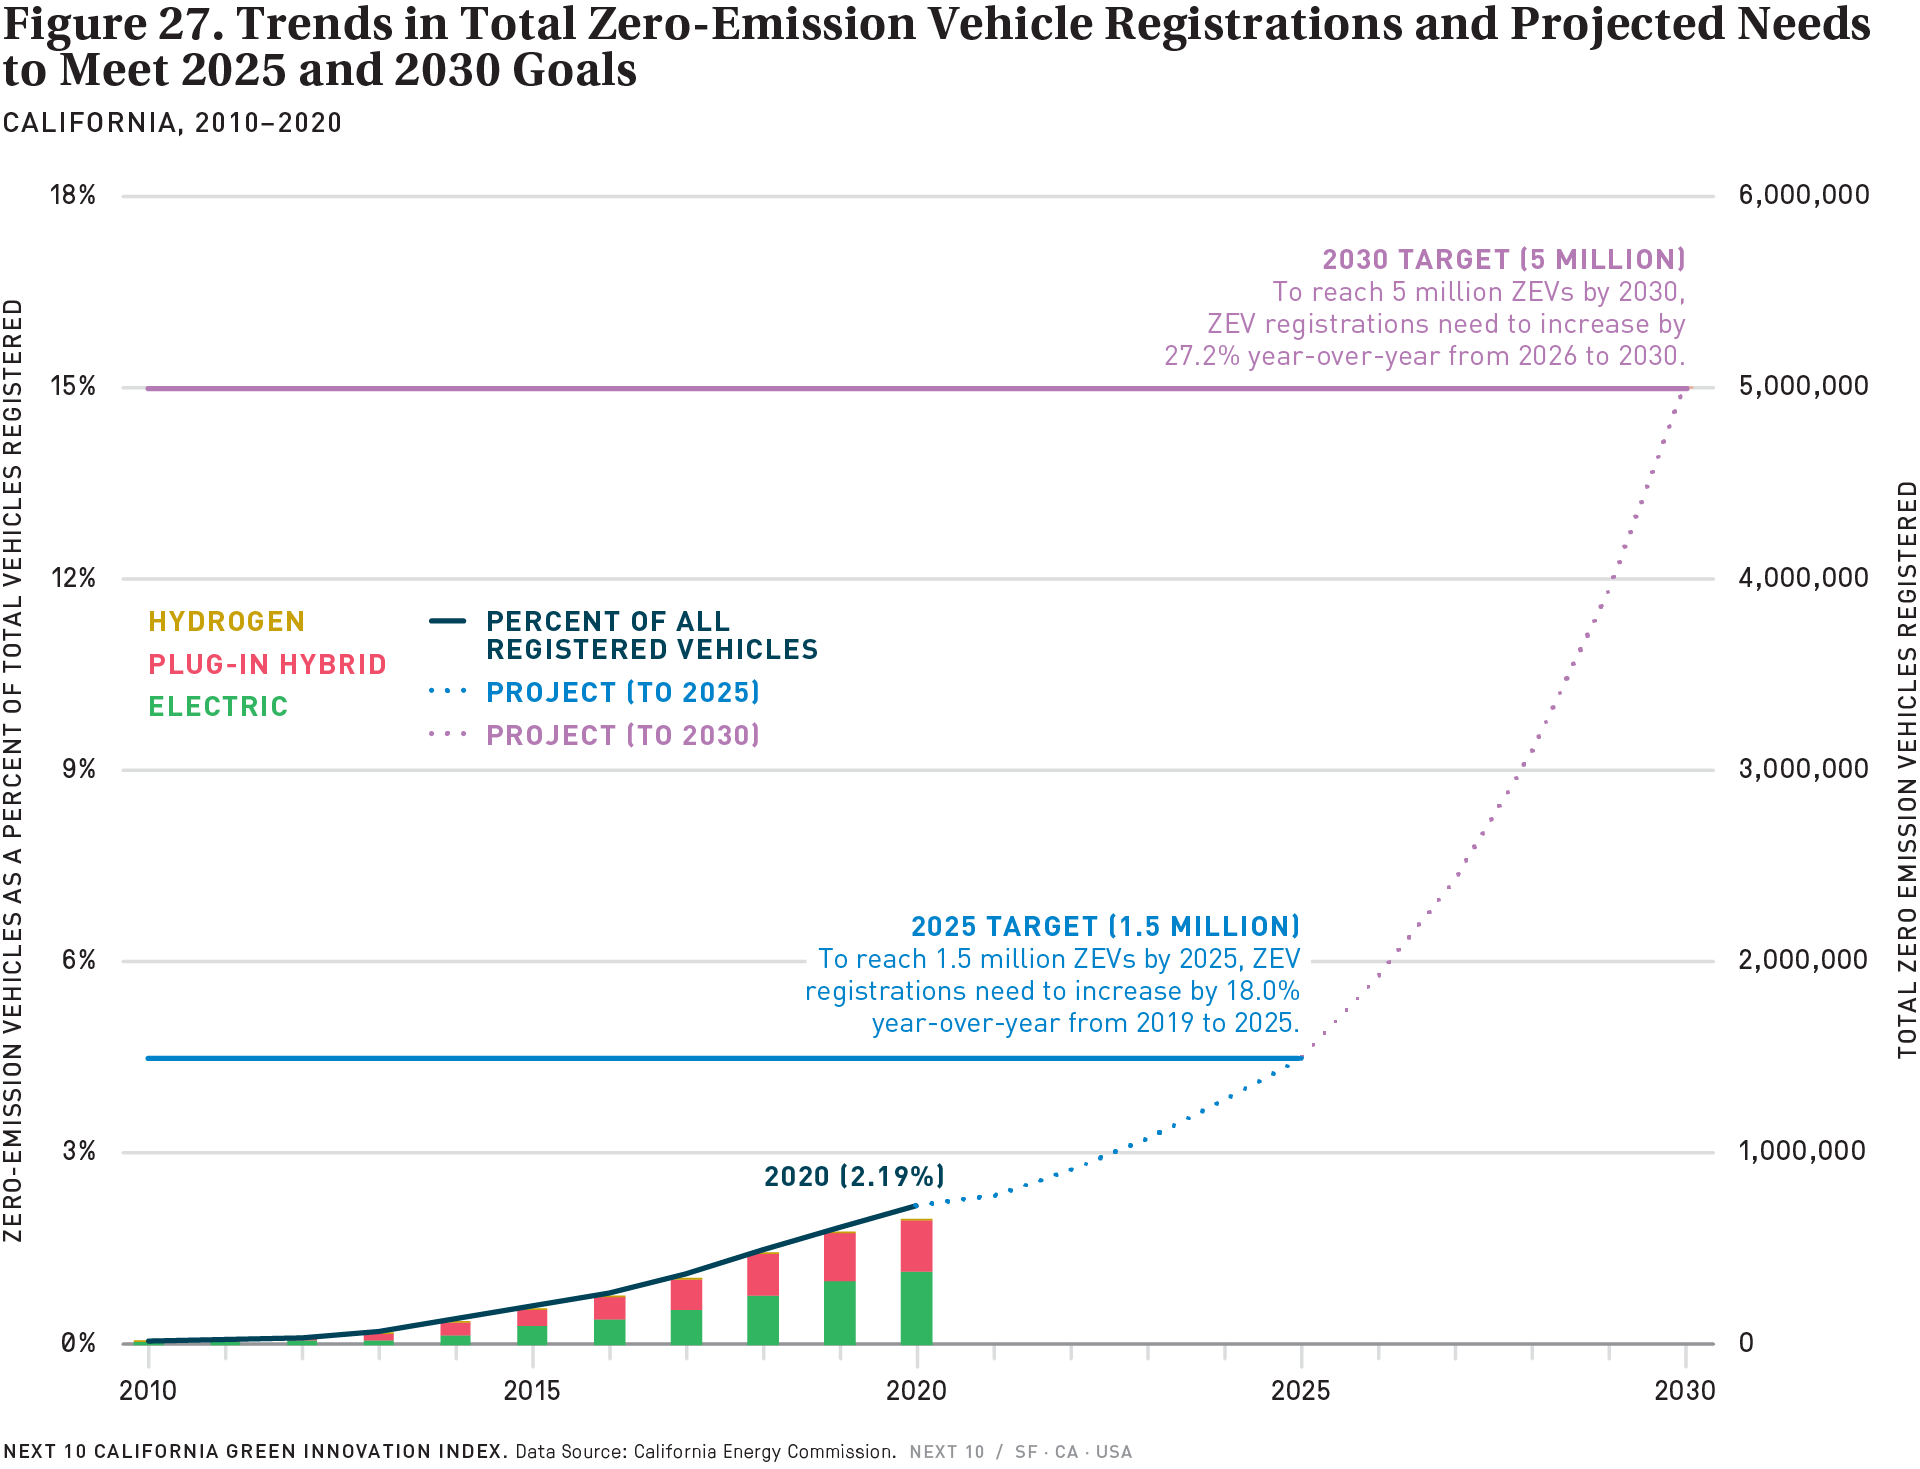 Figure 27. Trends in Zero-Emission Vehicle Registrations and Projected Needs to Meet 2025 and 2030 Goals